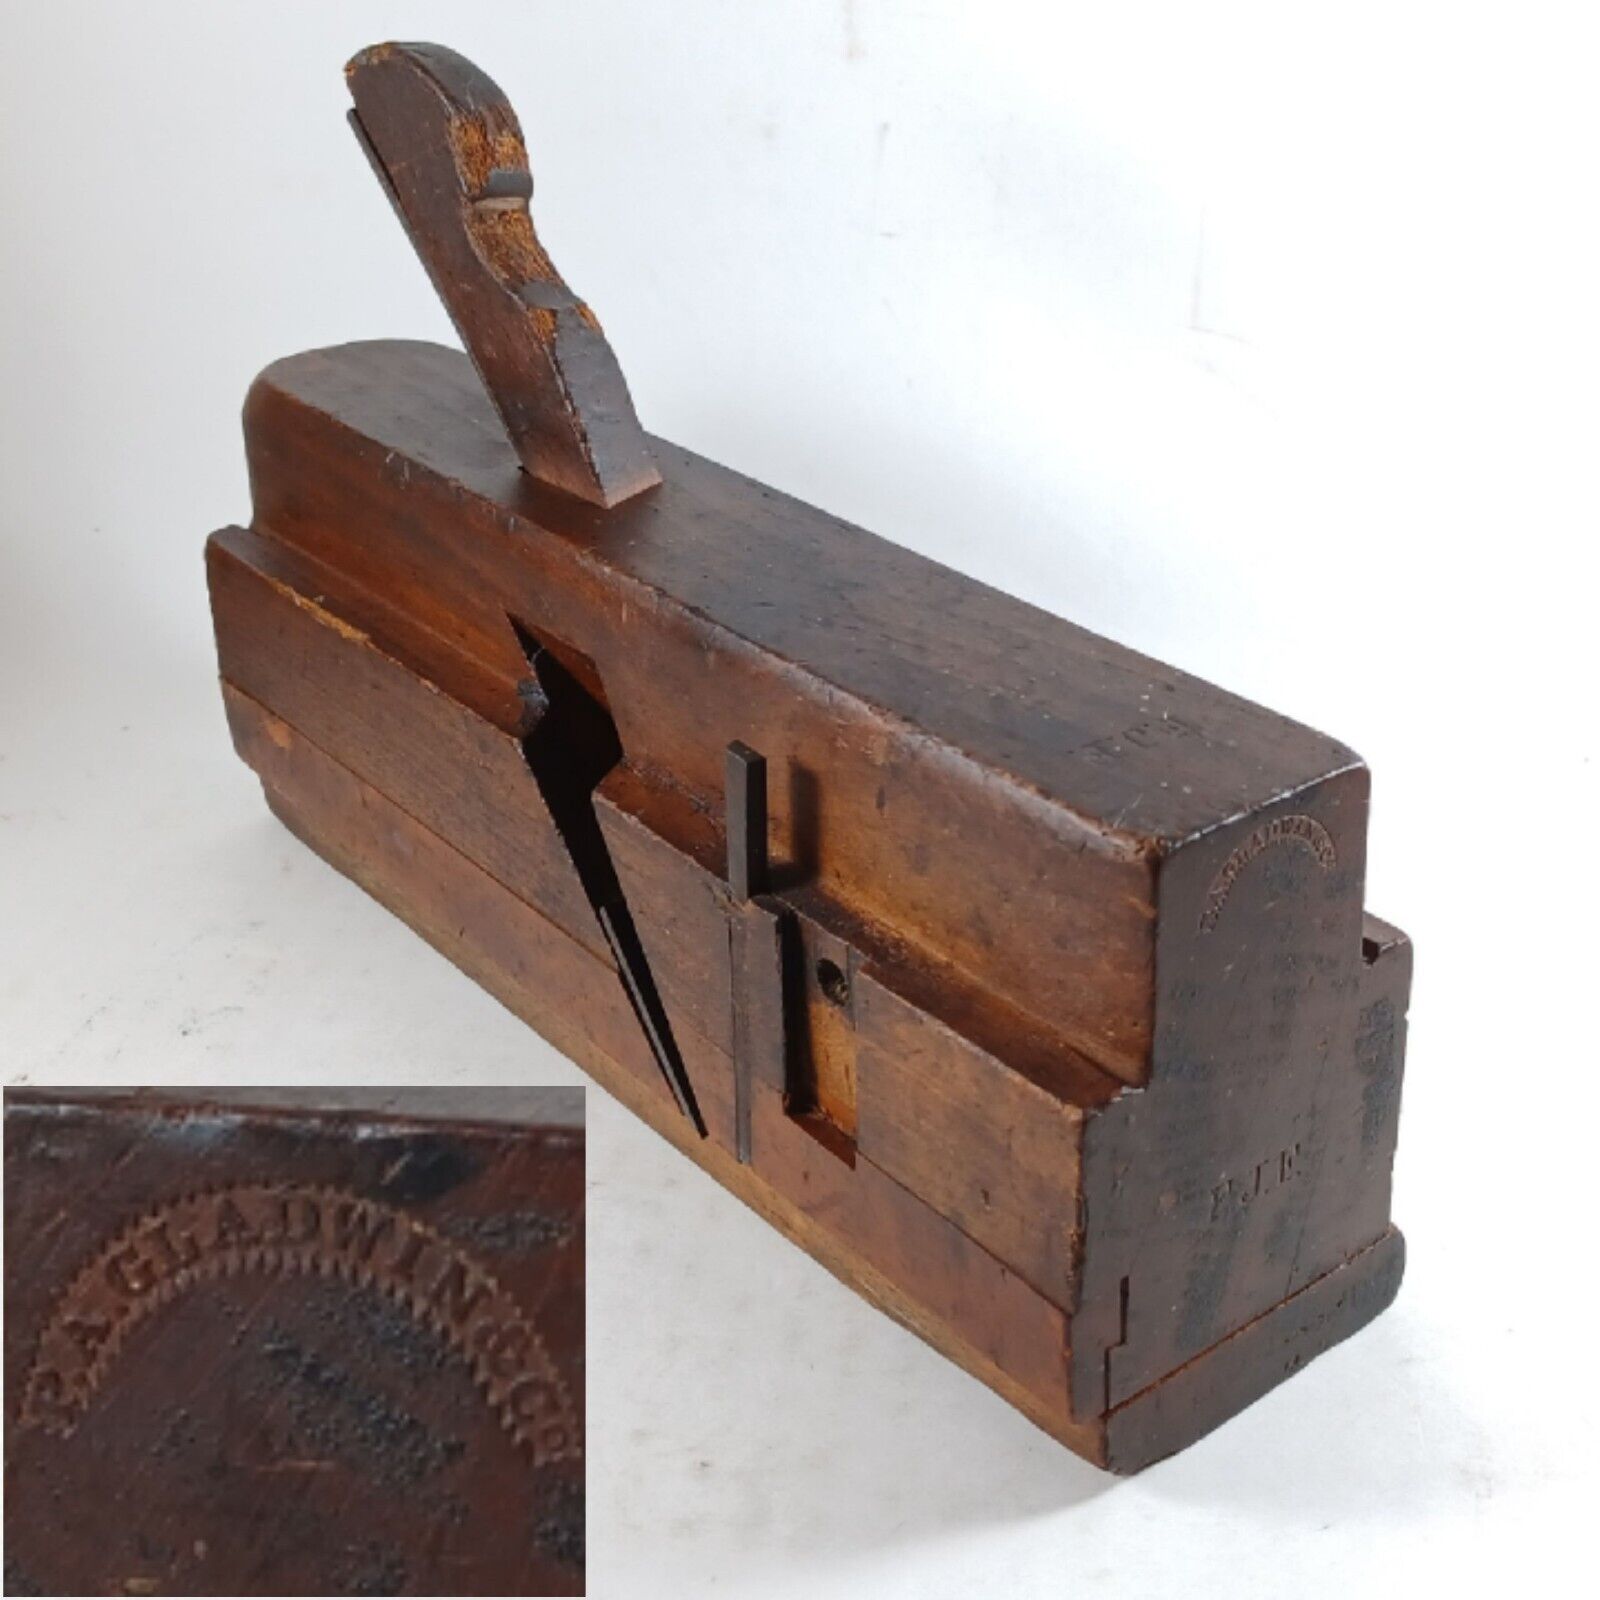 Antique P.A Gladwin & Co. Adjustable Moving Fillister Wood Plane